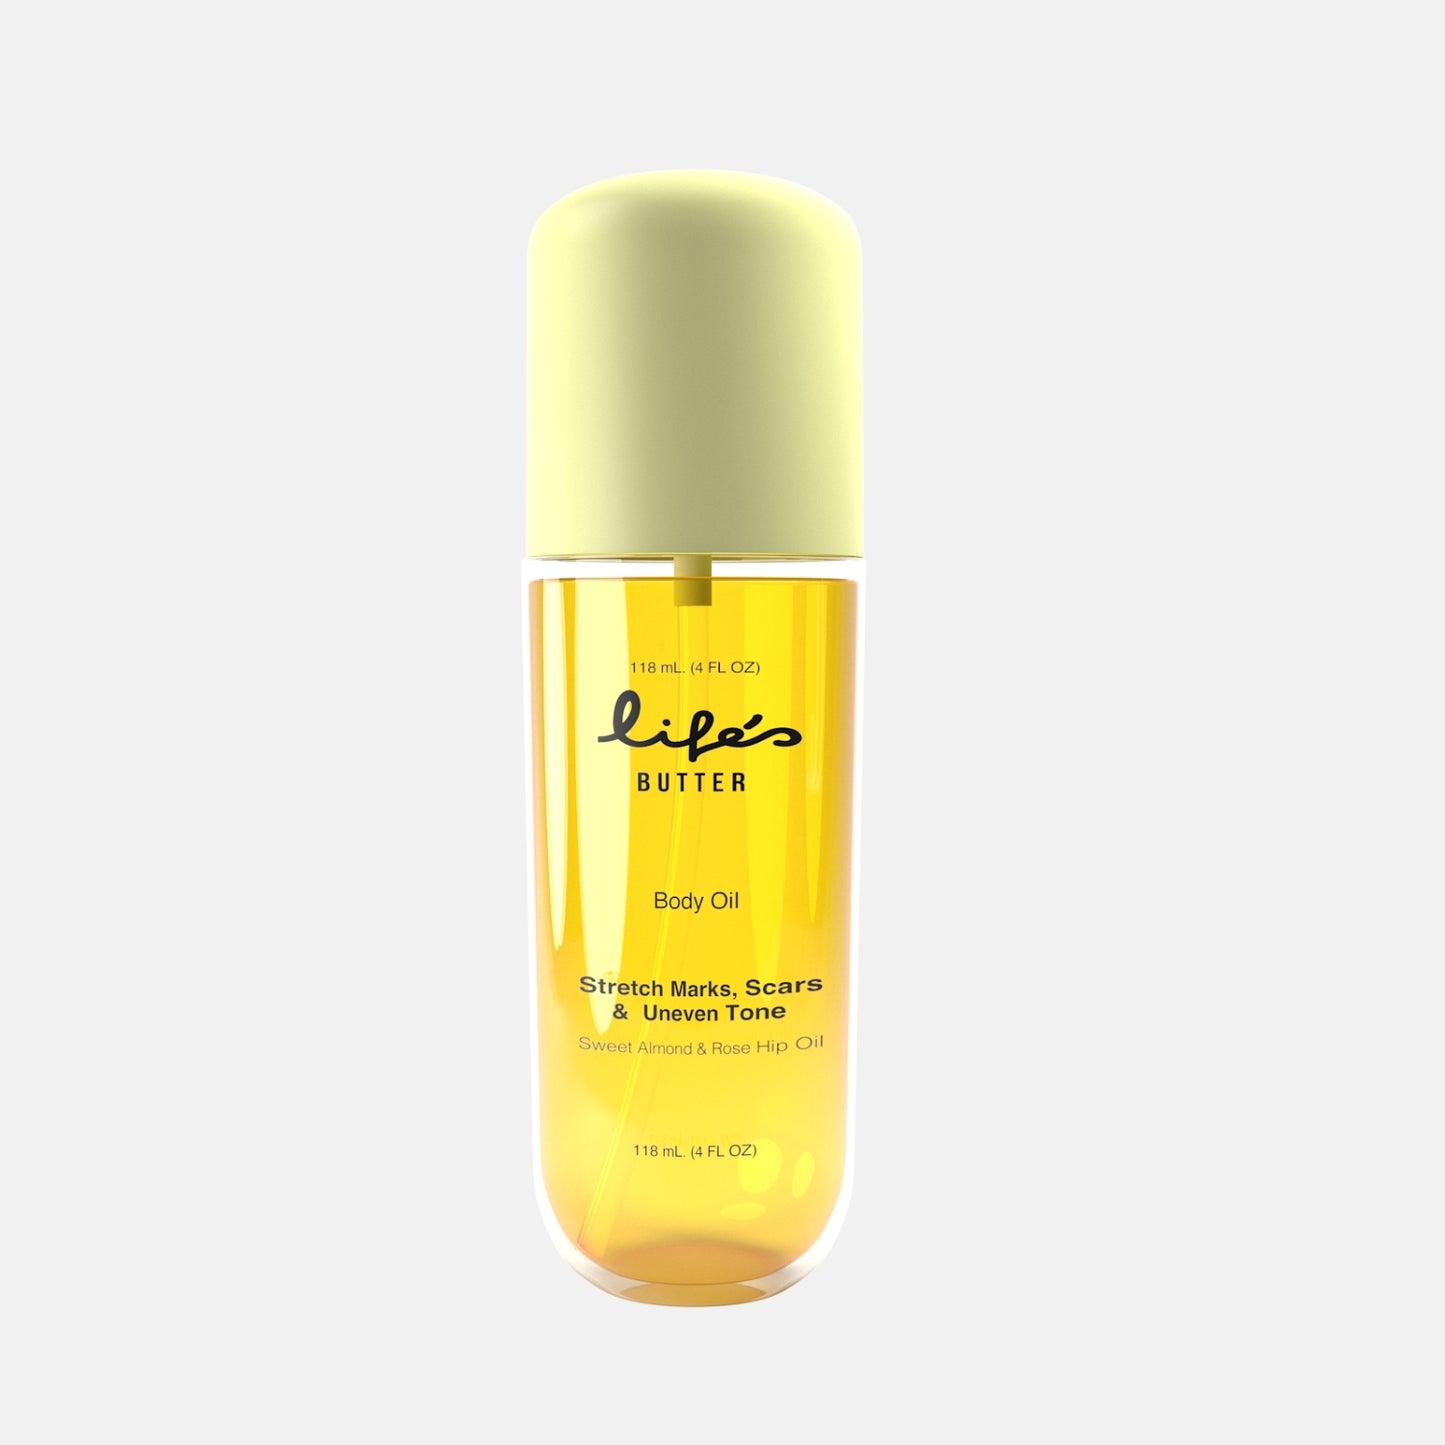 Life's butter Body Oil - Belly Oil for stretch marks and uneven skin tone